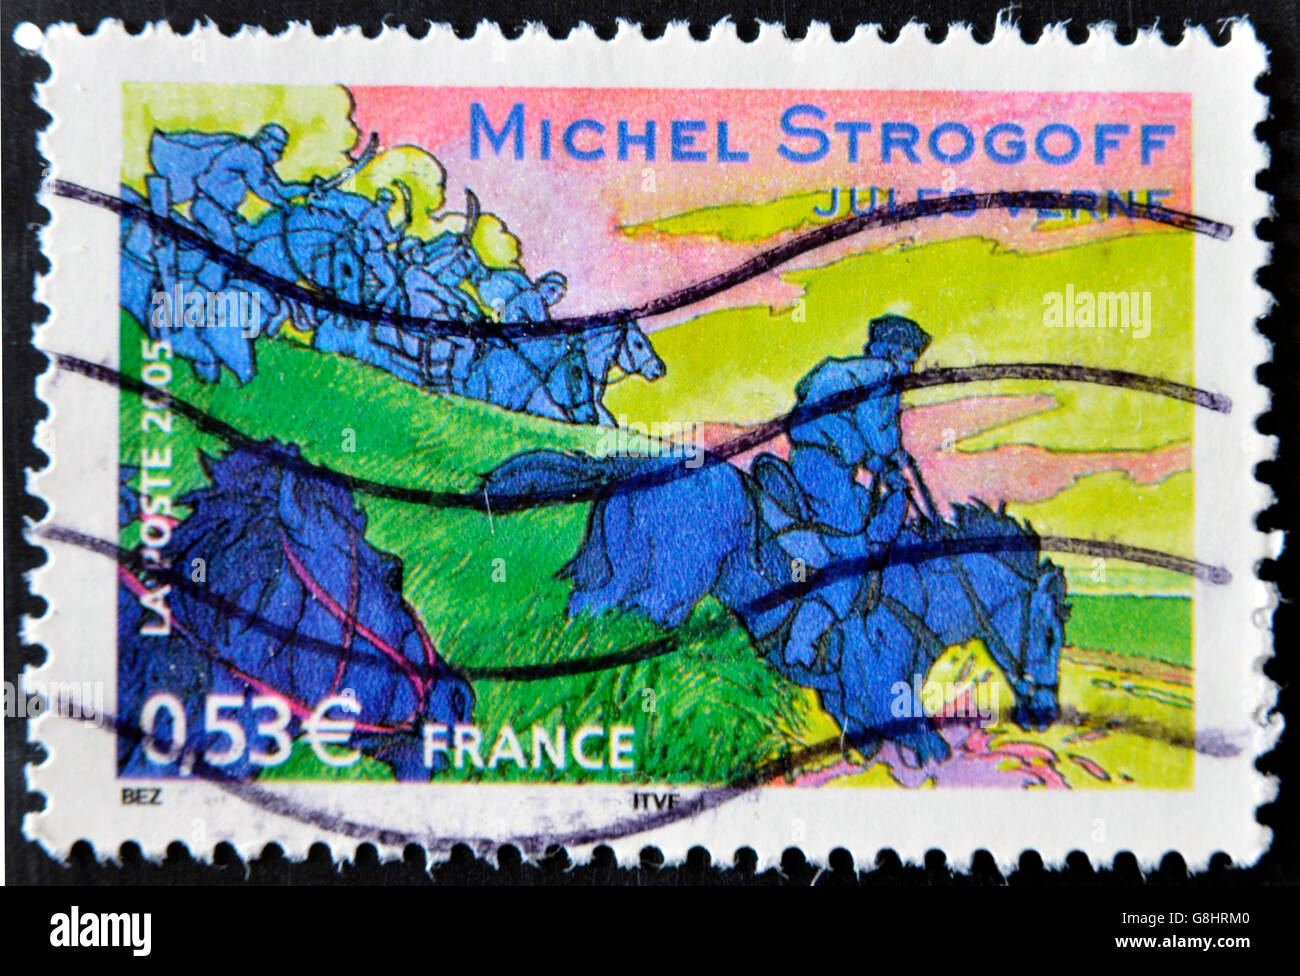 FRANCE - CIRCA 2005: A stamp printed in France shows an image of 'Michael Strogoff' a novel by Jules Verne, circa 2005 Stock Photo